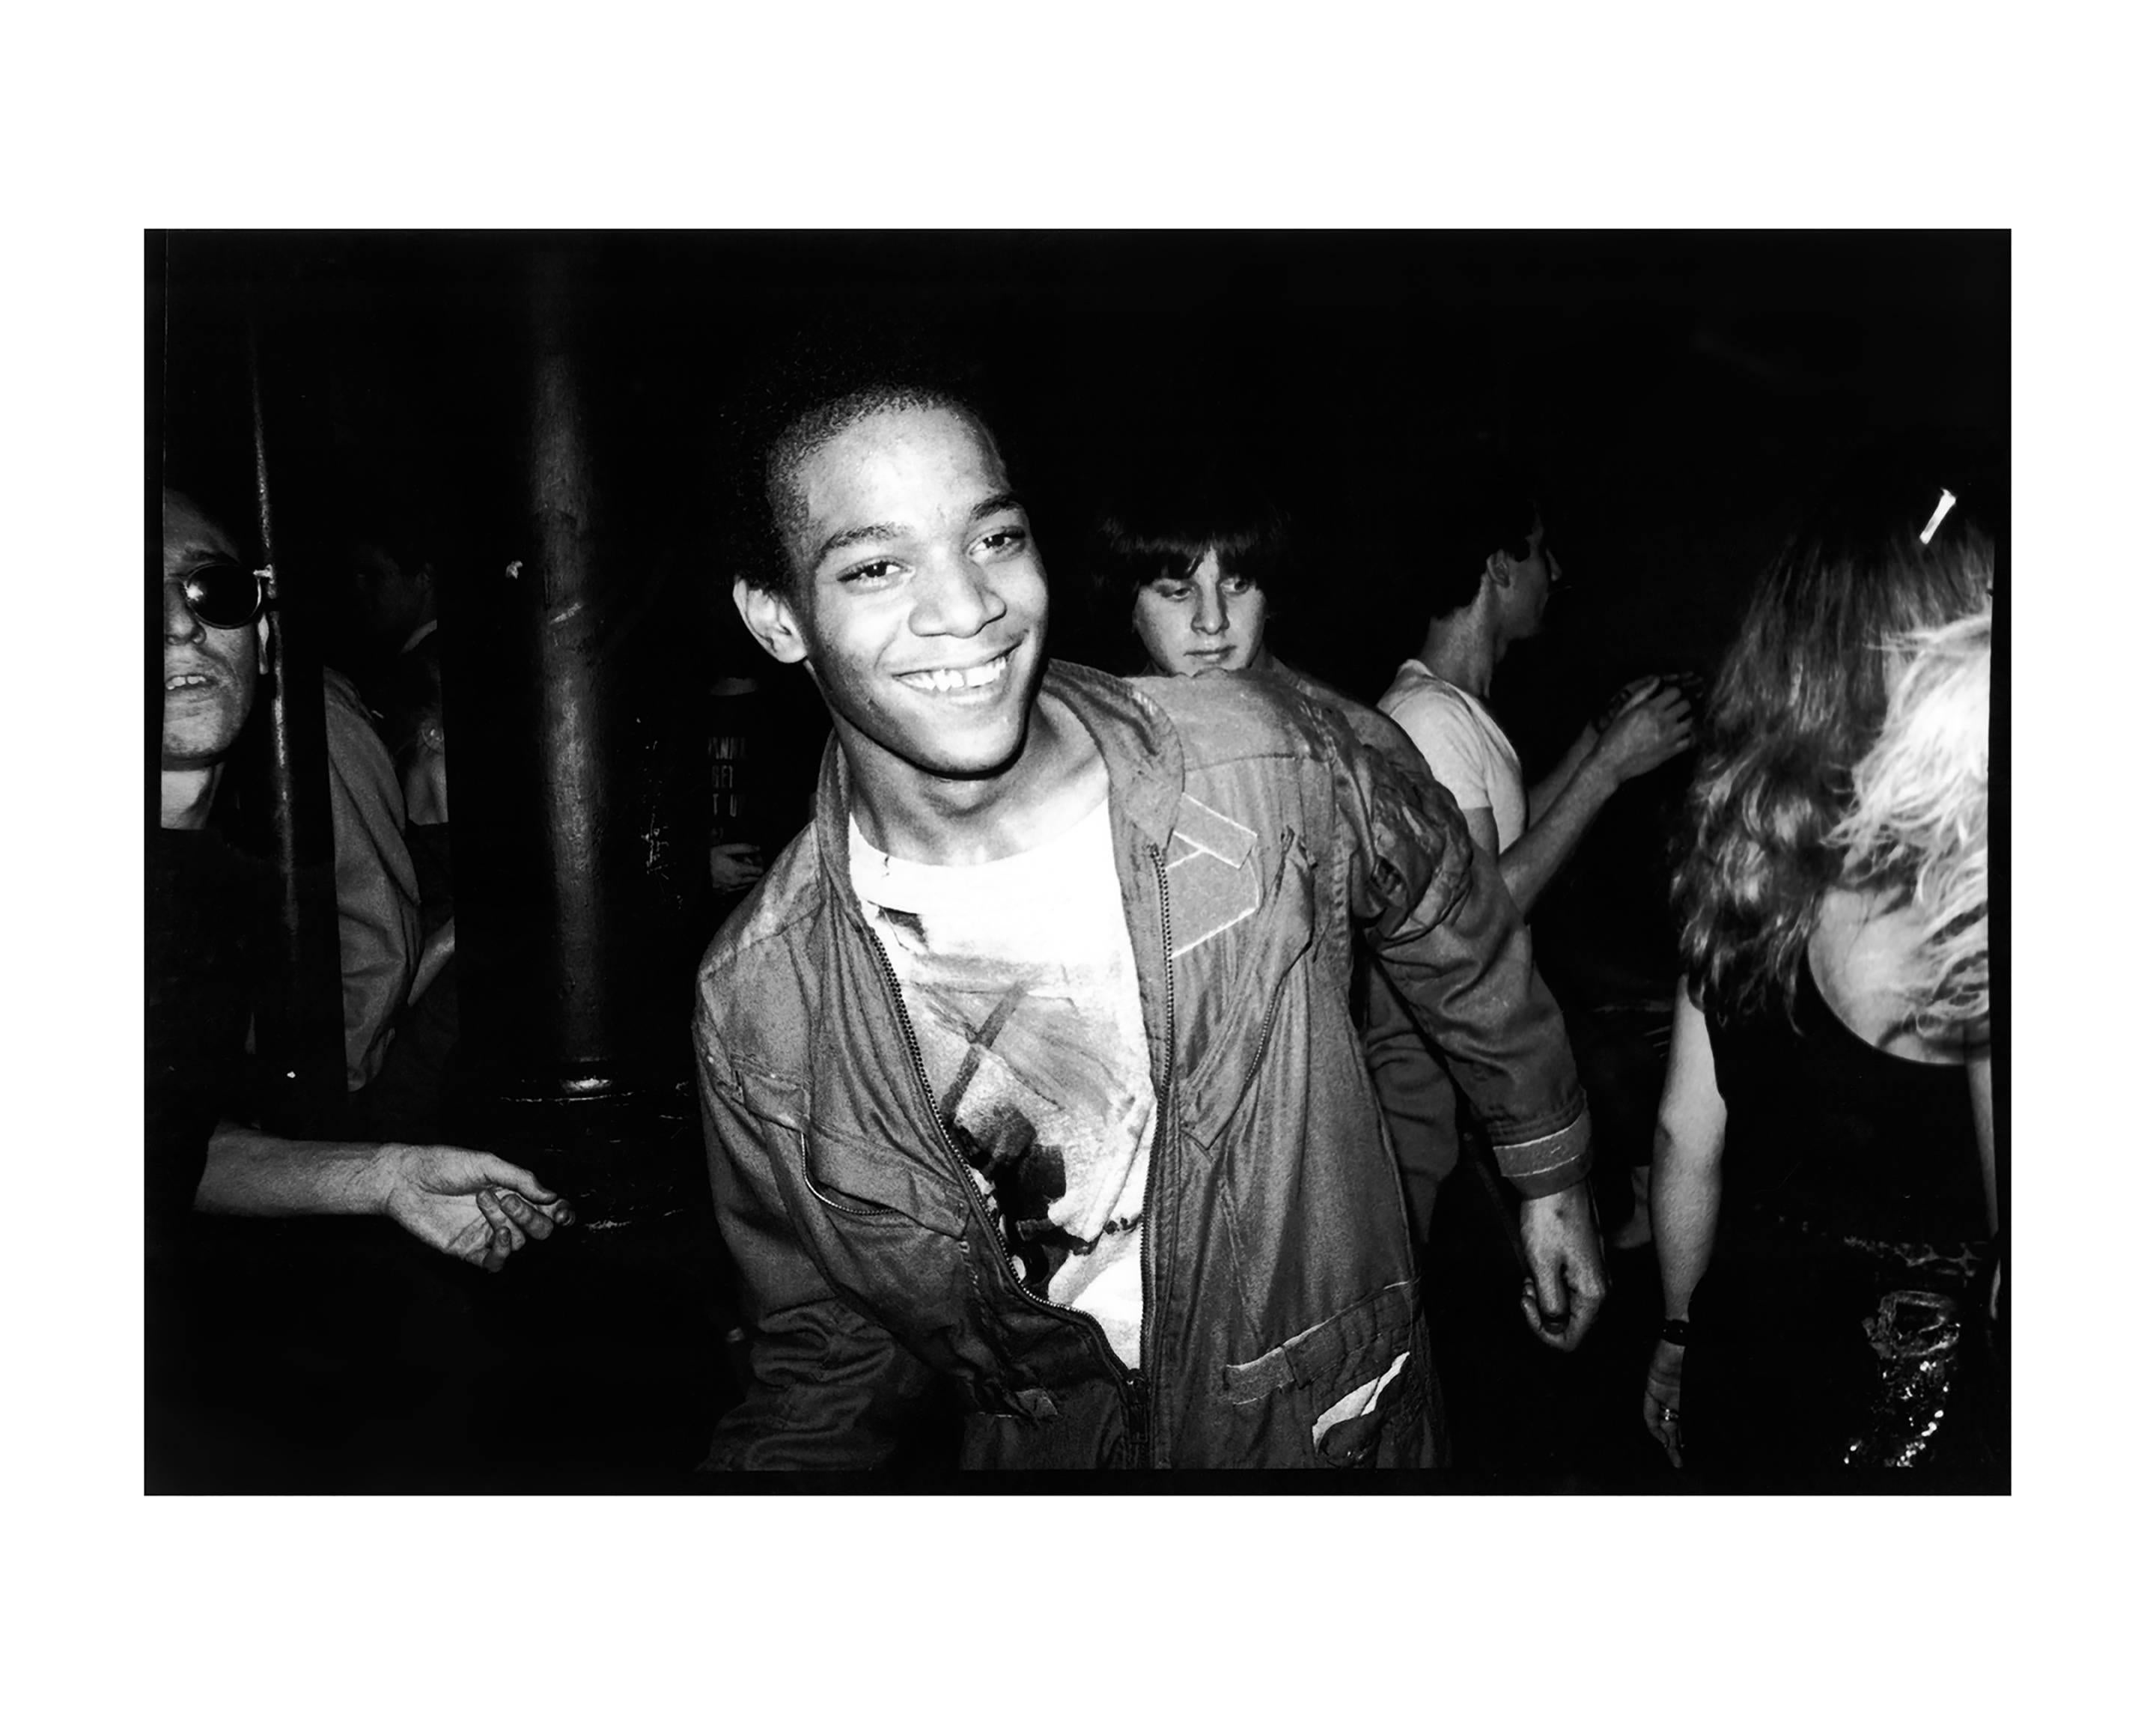 Nicholas Taylor Black and White Photograph - BASQUIAT Dancing at The Mudd Club, 1979 (Boom For Real)